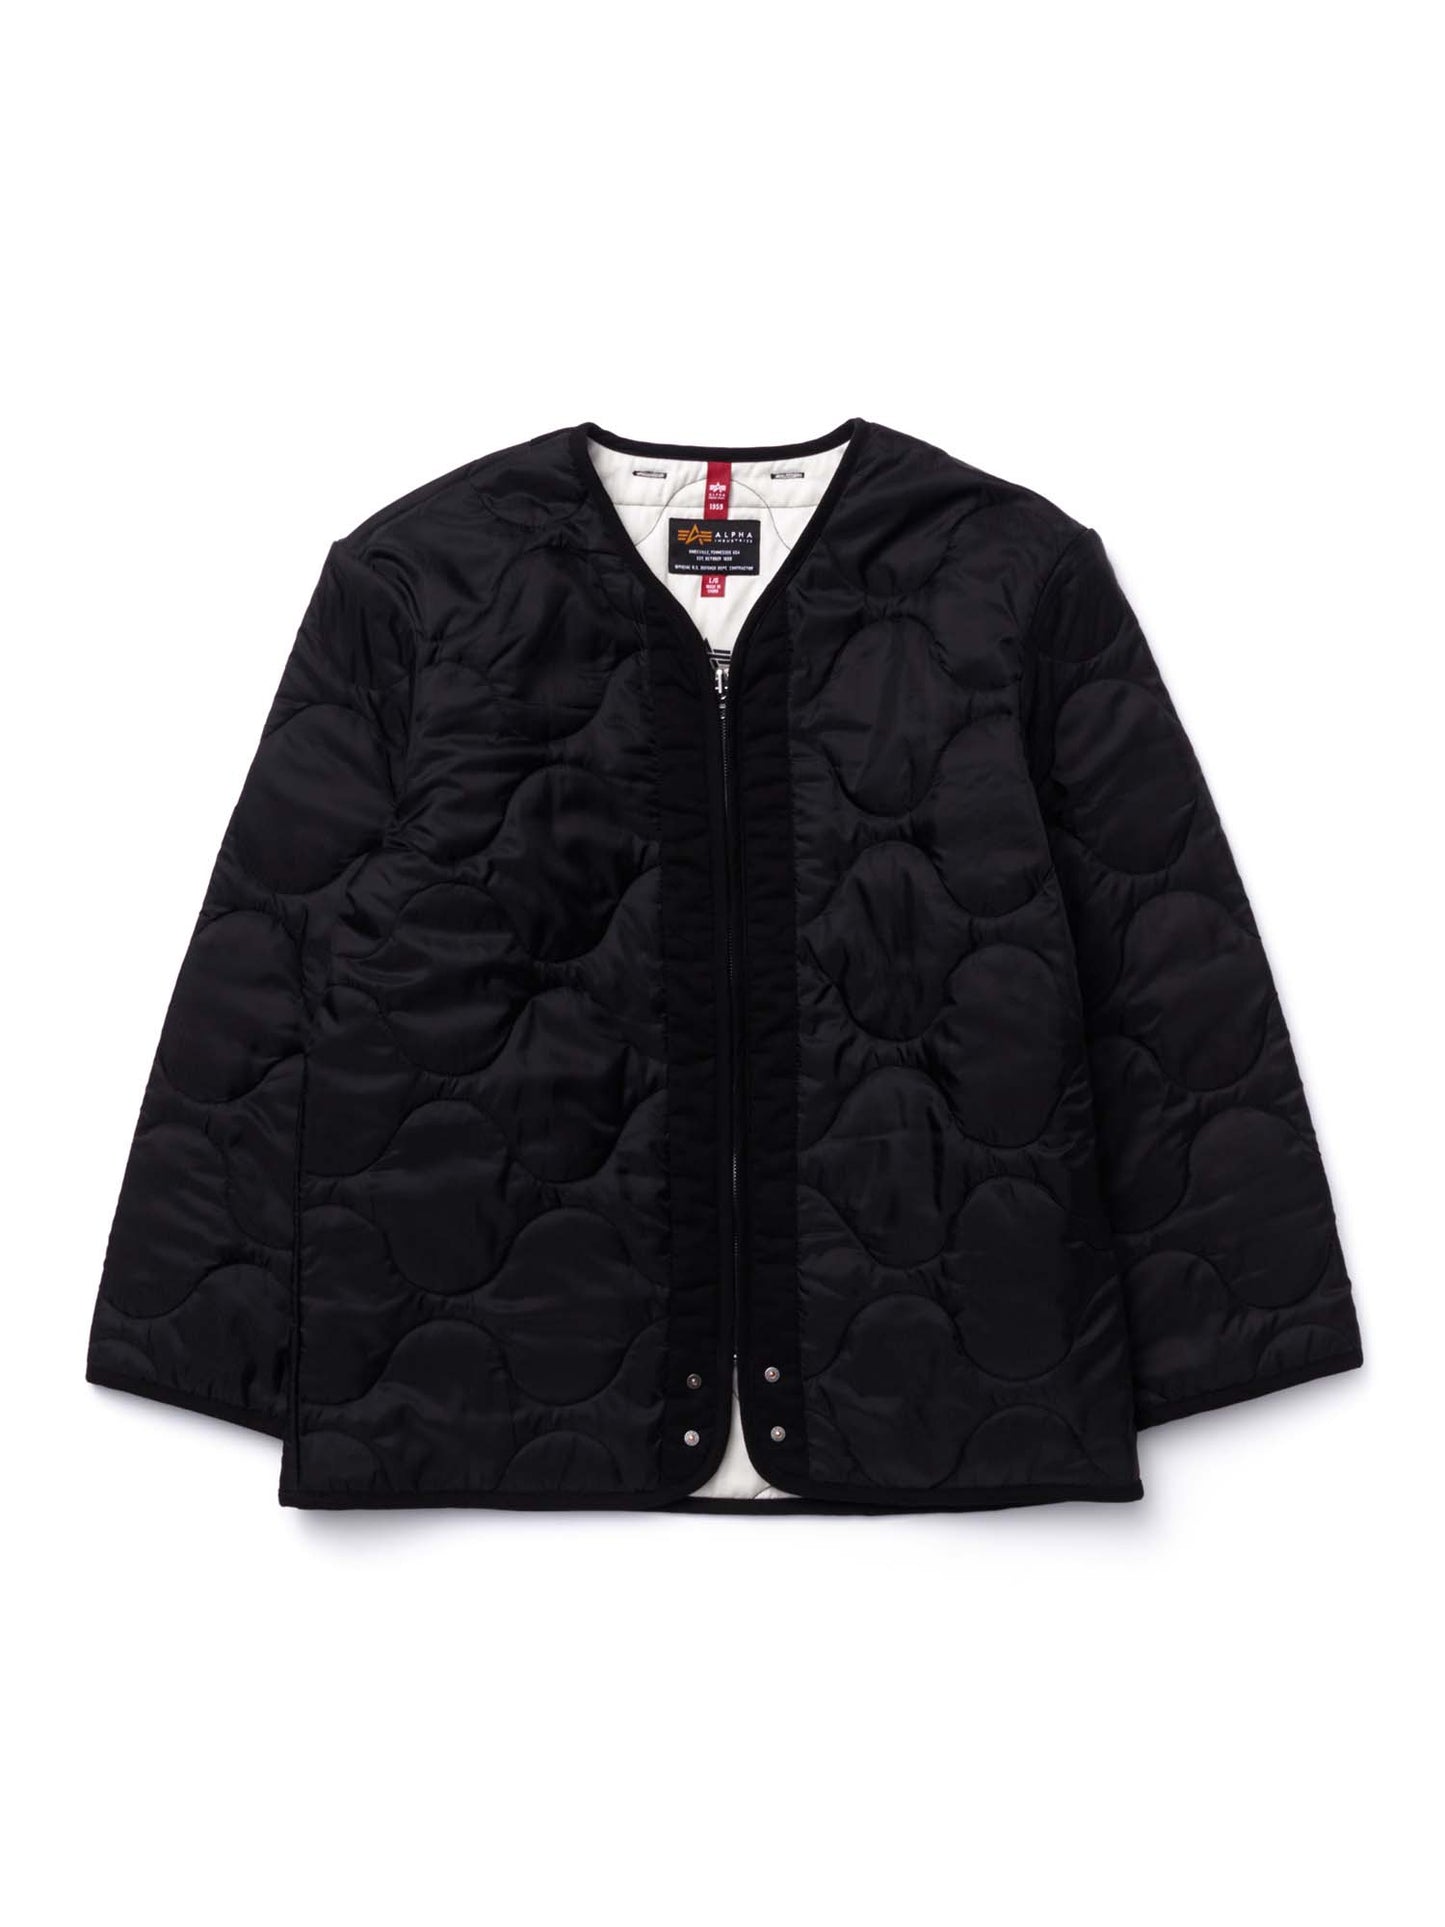 IISE X ALPHA BLOOD CHIT LINER OUTERWEAR Alpha Industries, Inc. 